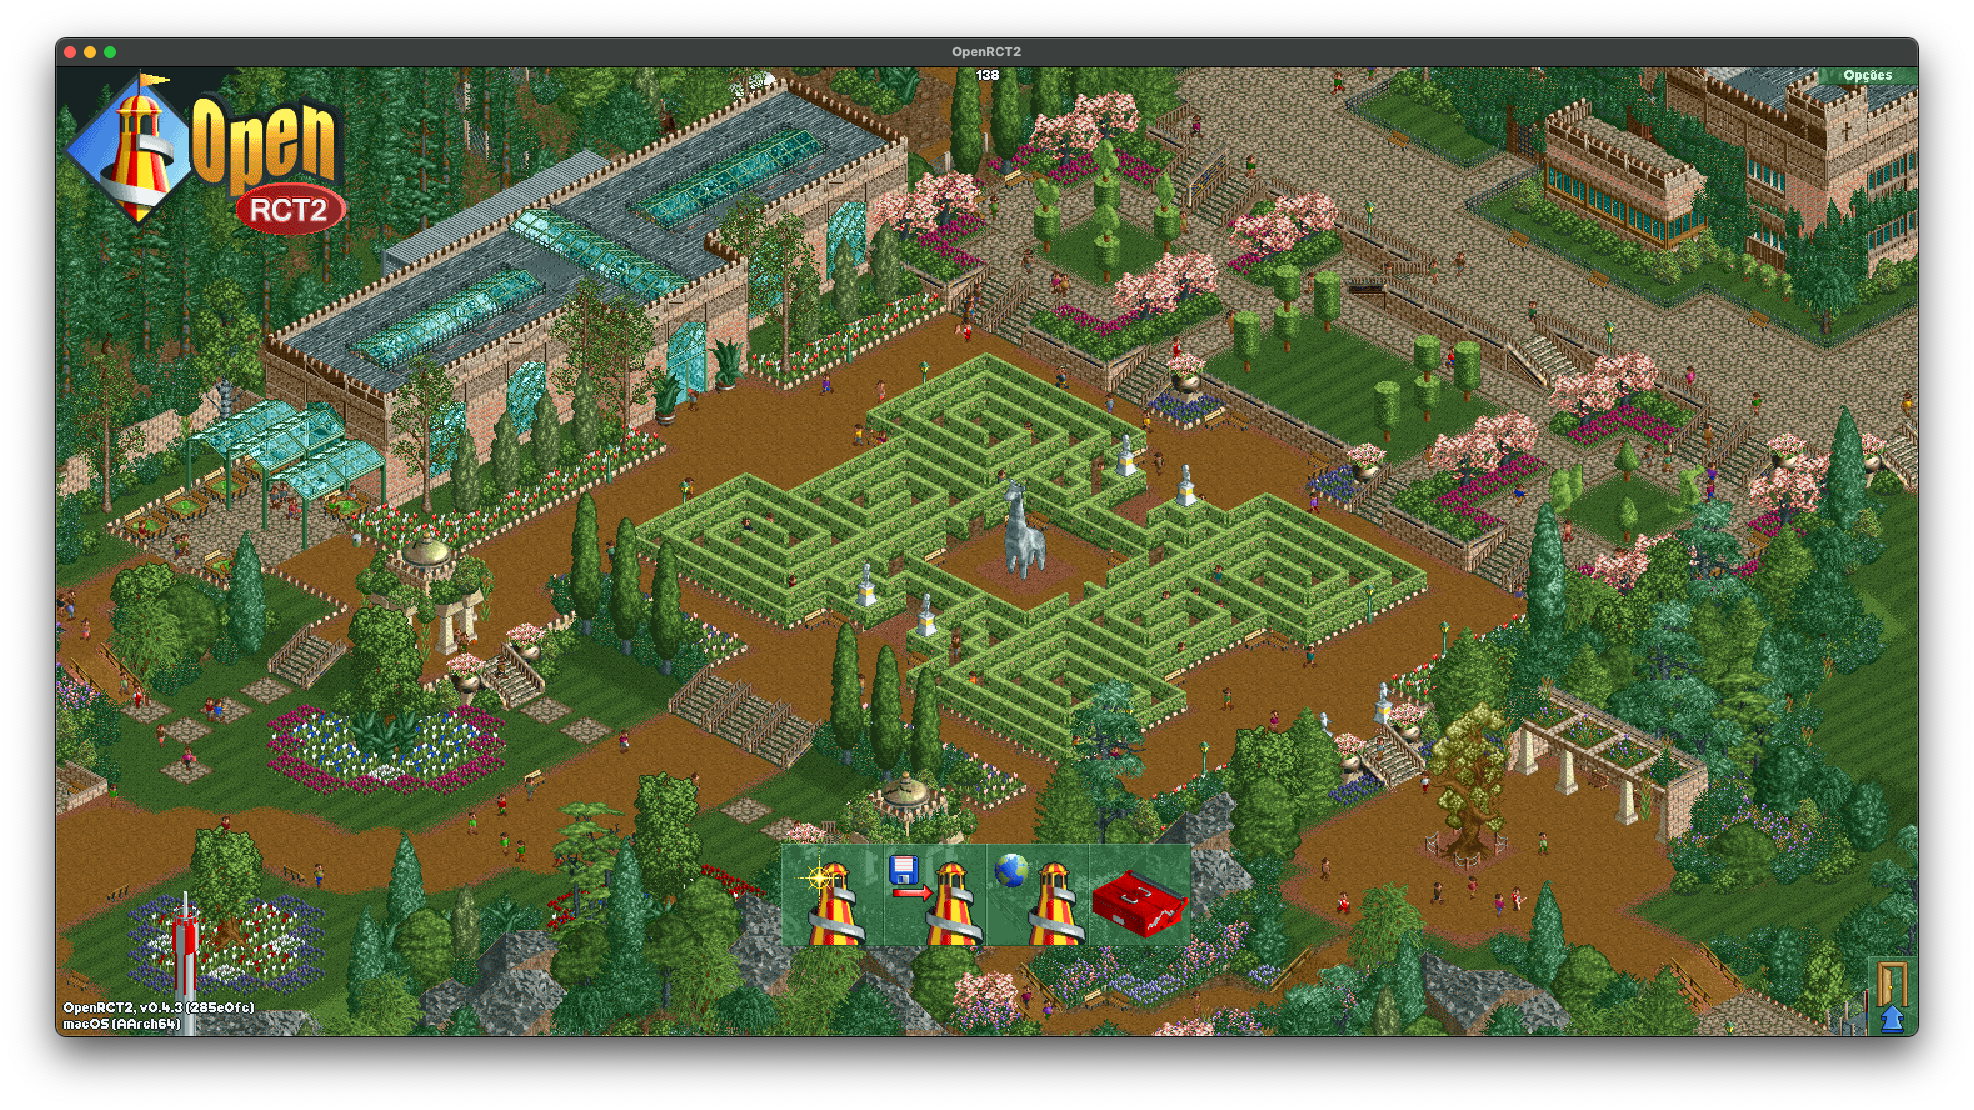 OpenRCT2, the open source game engine for RollerCoaster Tycoon 2